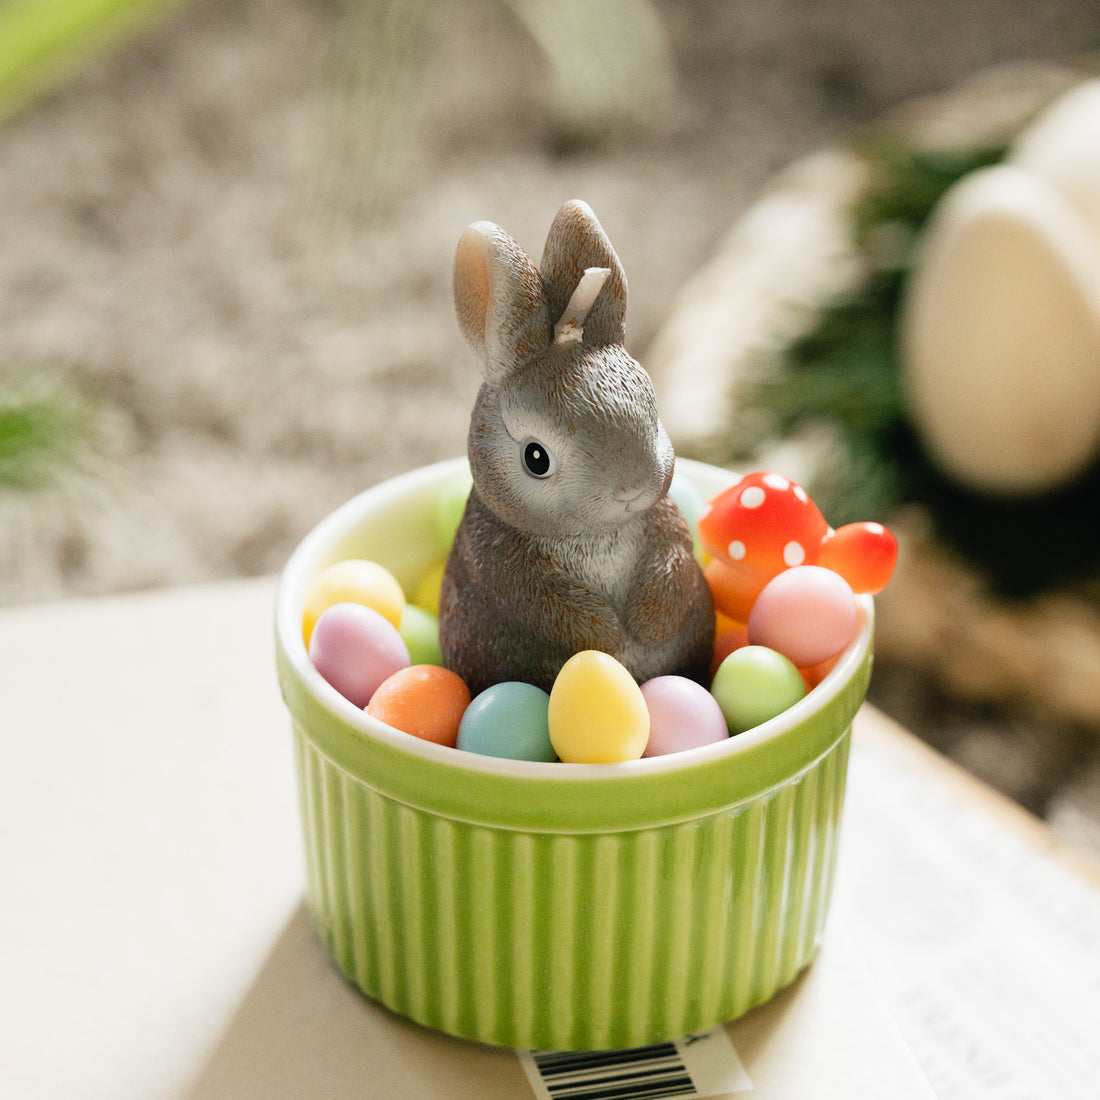 A Easter Rabbit Bunny Egg Candle from Southlake Gifts is perfect gifts and decor for every occasion.